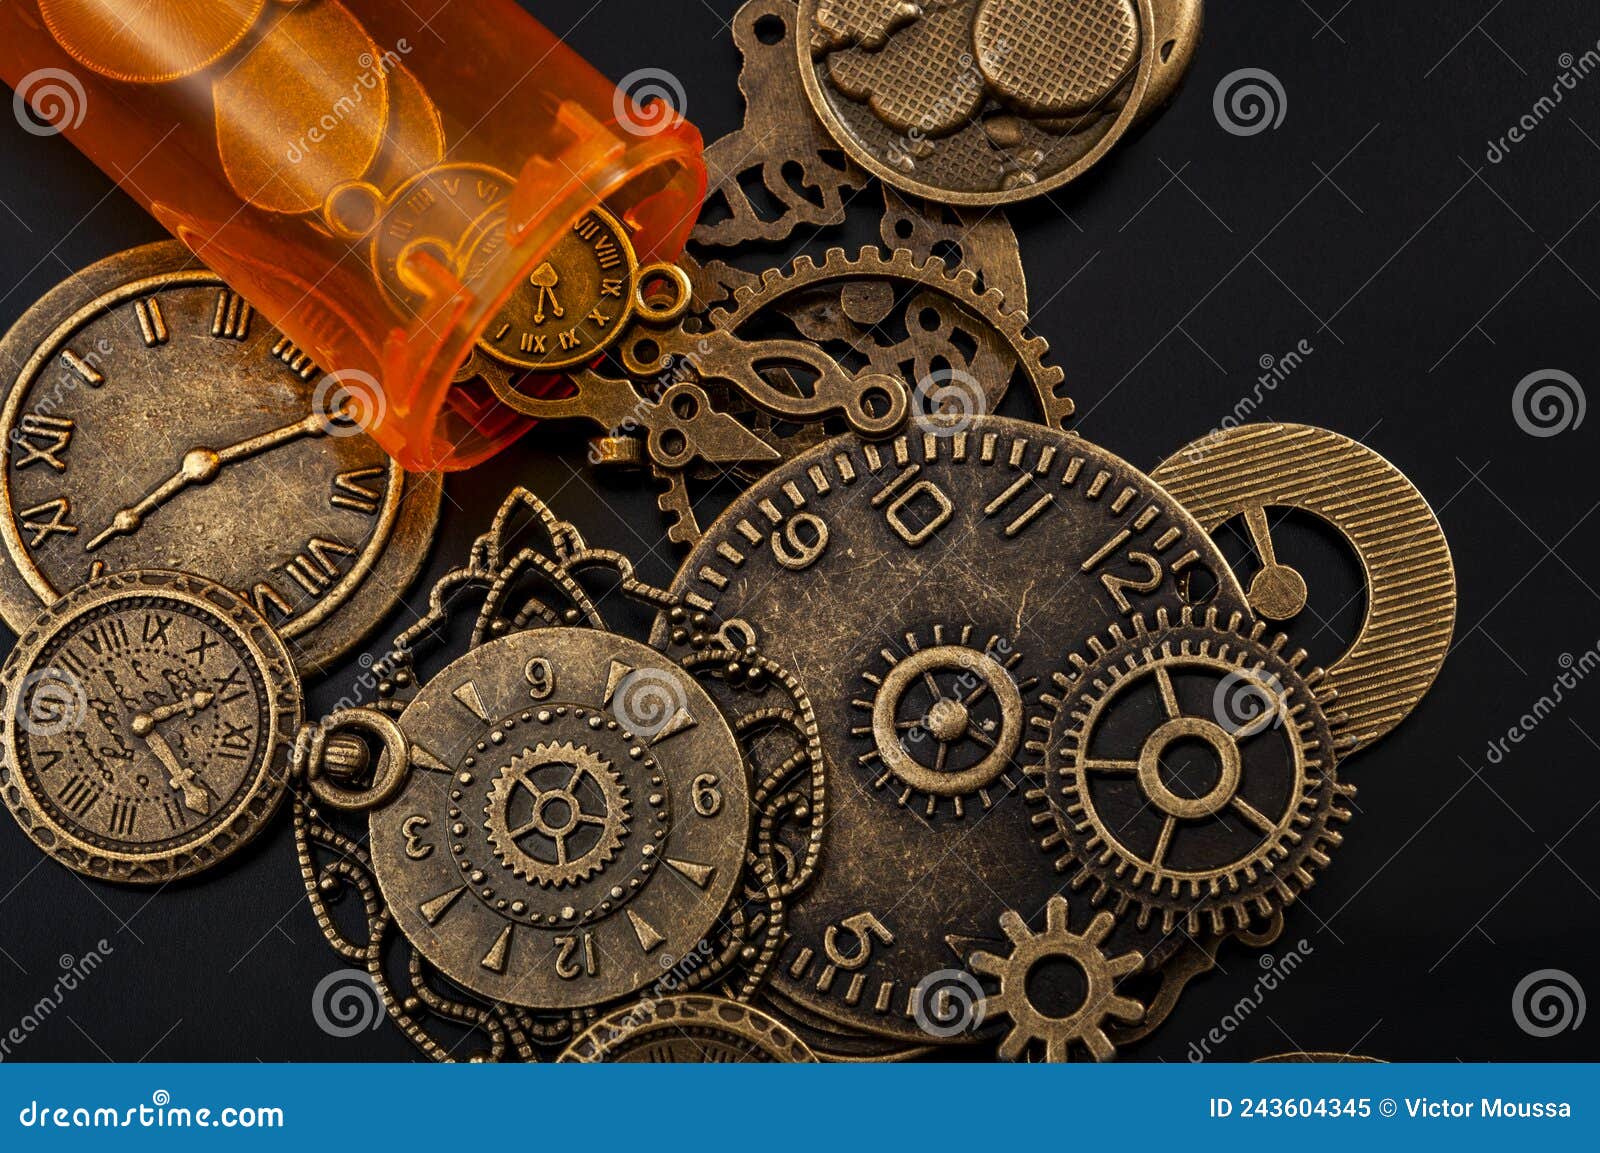 time cures everything or time heals every pain concept with a bottle of prescription painkiller bottle and small metallic clock